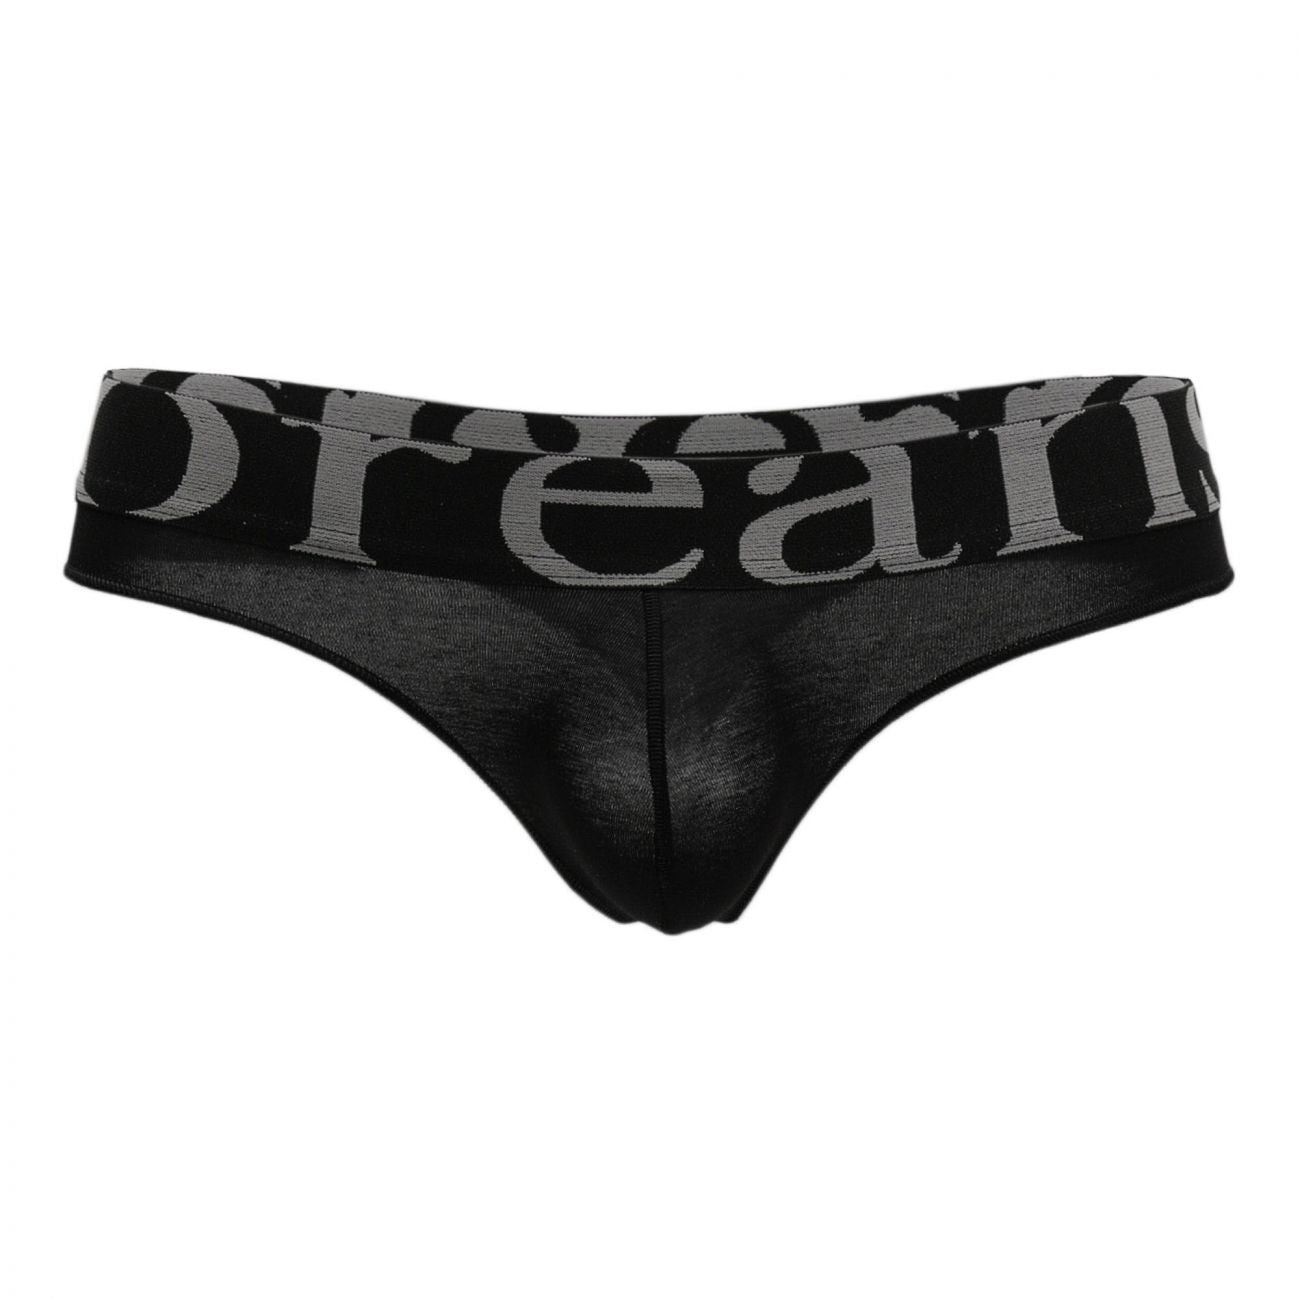 under-yours - Wide-band Thong - Doreanse - Mens Underwear